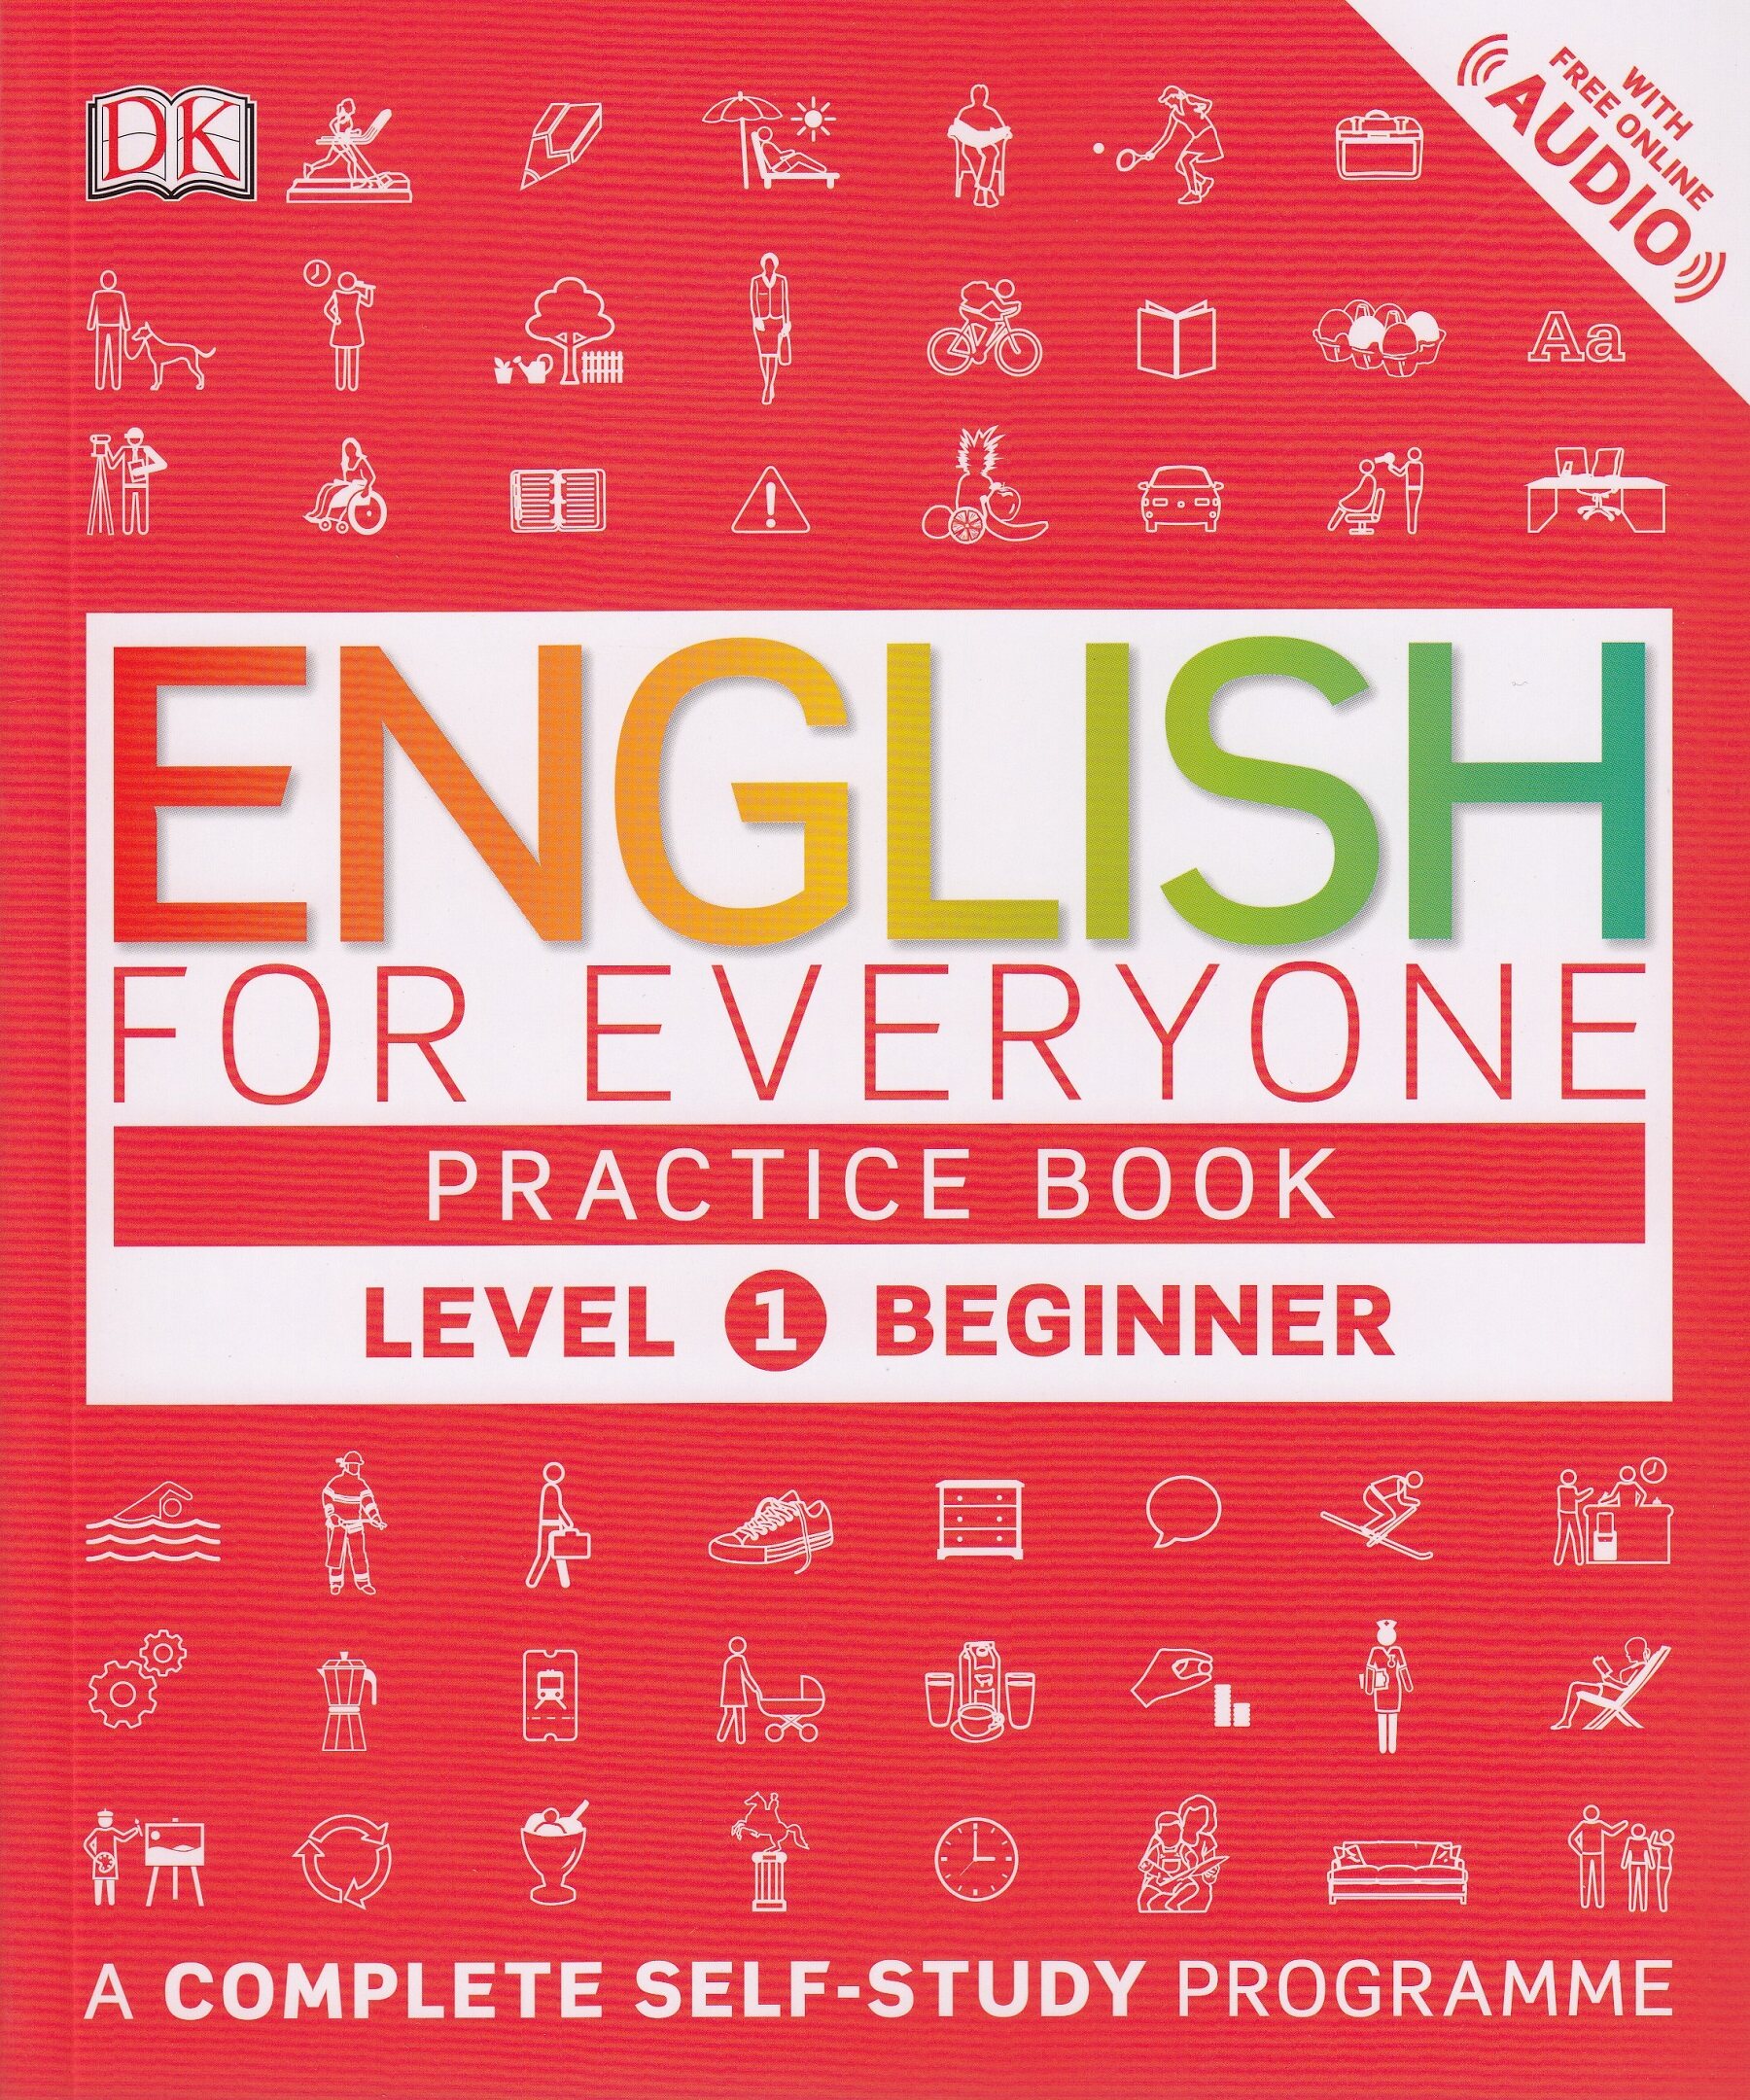 DK Today-ENGLISH FOR EVERYONE 1: PRACTICE BOOK